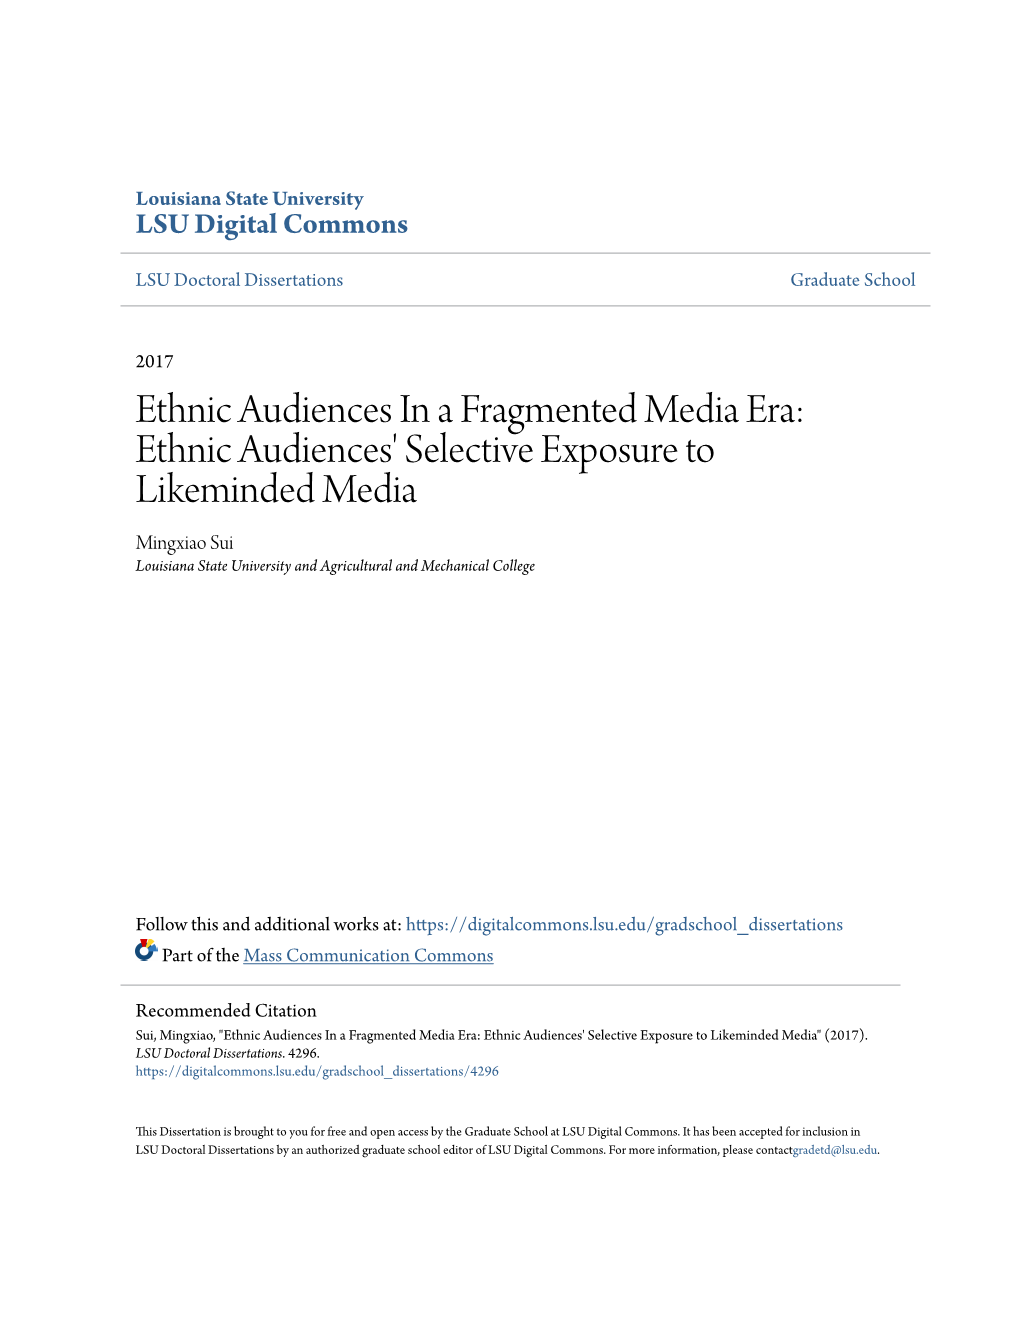 Ethnic Audiences' Selective Exposure to Likeminded Media Mingxiao Sui Louisiana State University and Agricultural and Mechanical College